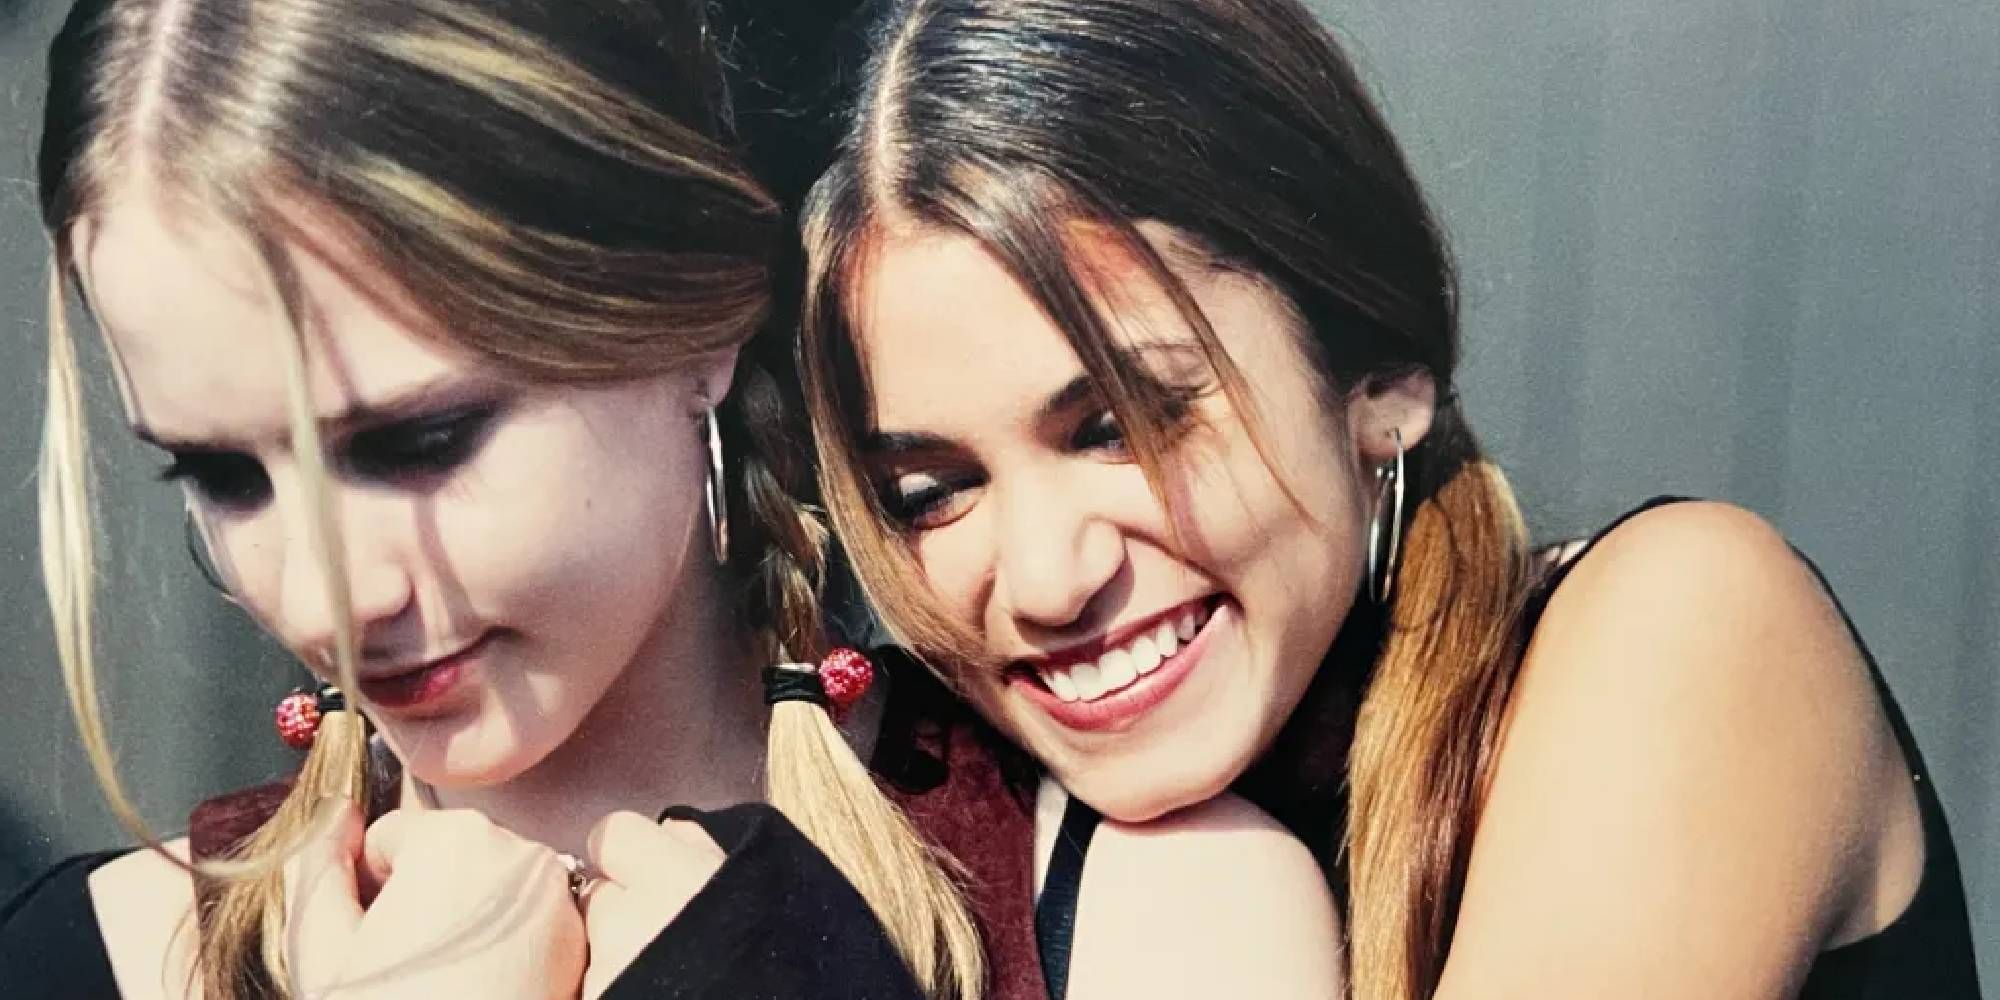 Evan Rachel Wood as Tracy and Nikki Reed as Evie in Thirteen close-up shot.